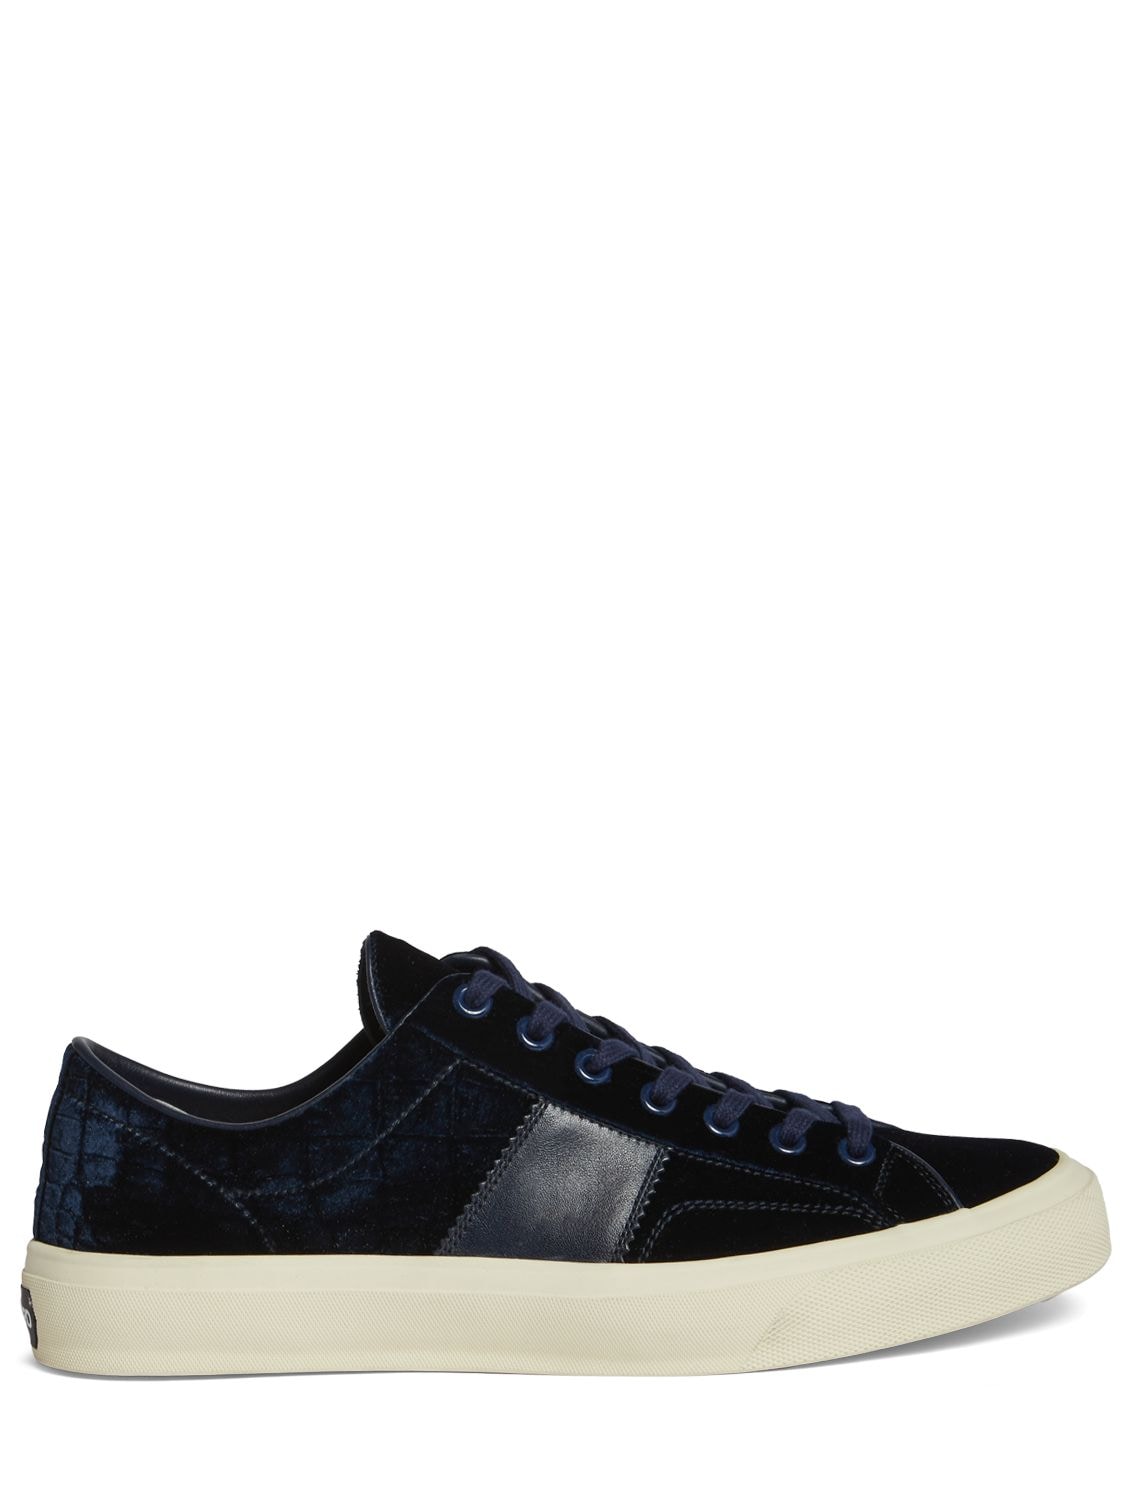 Leather Low Top Sneakers - TOM FORD - Modalova